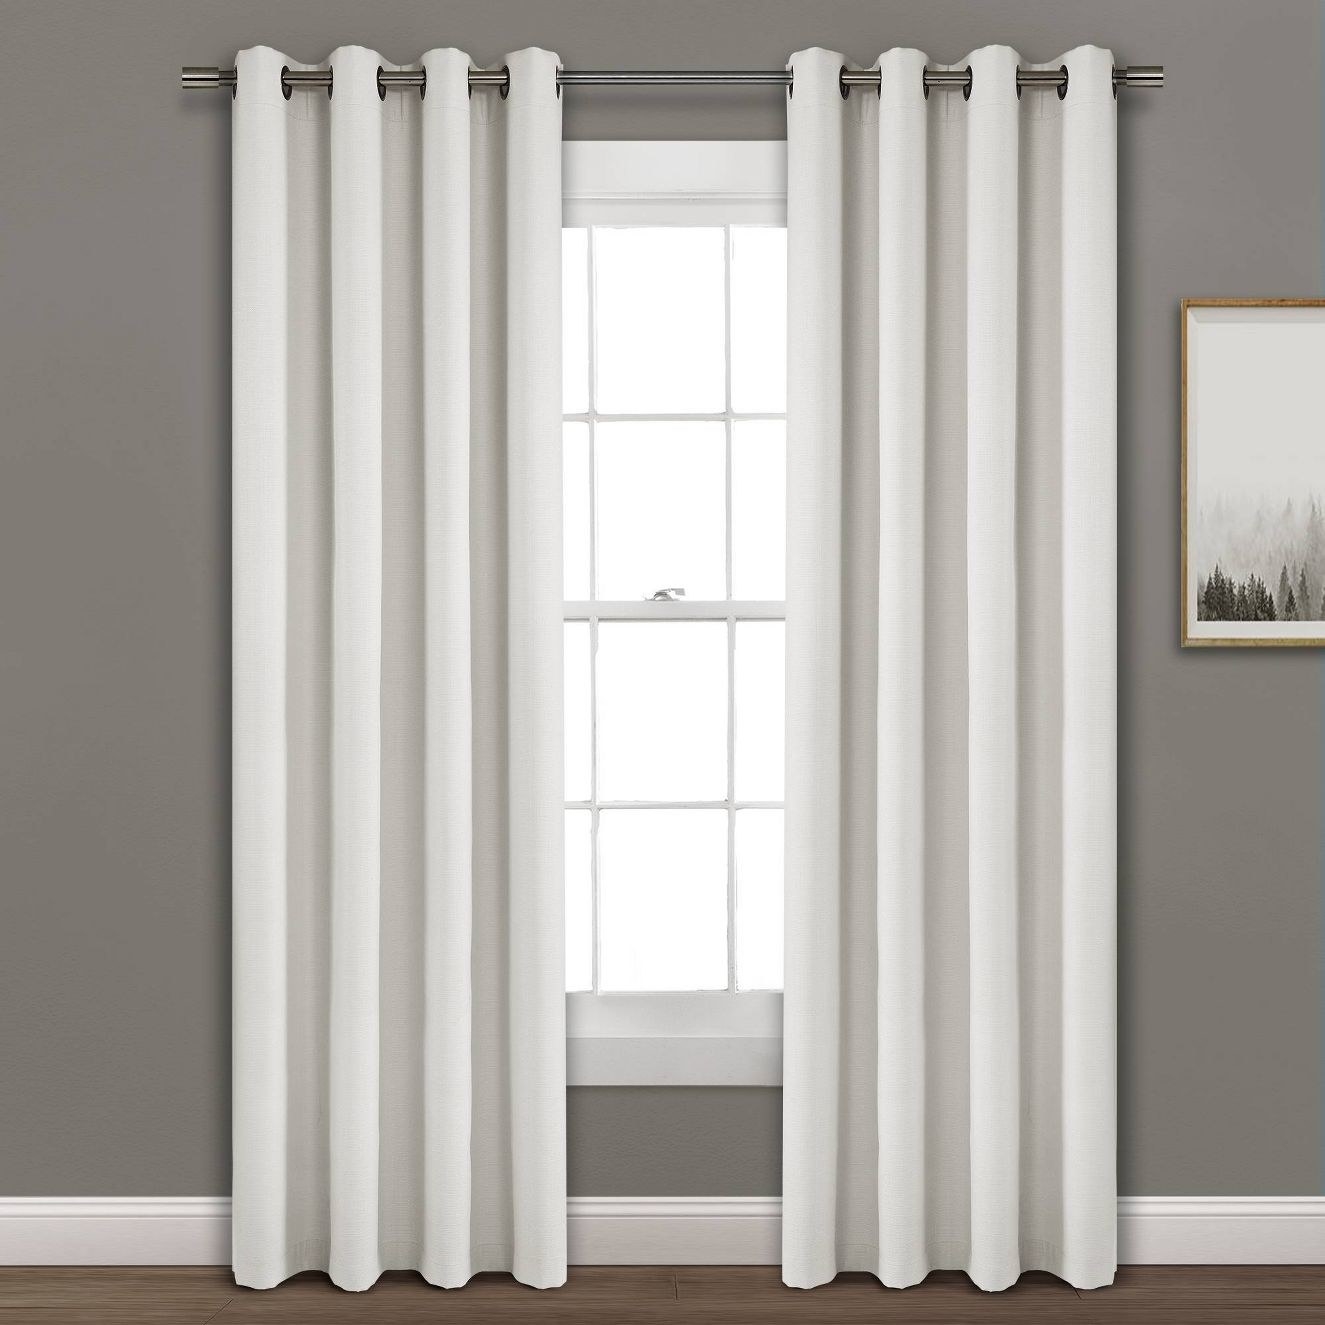 The curtains in white on a window